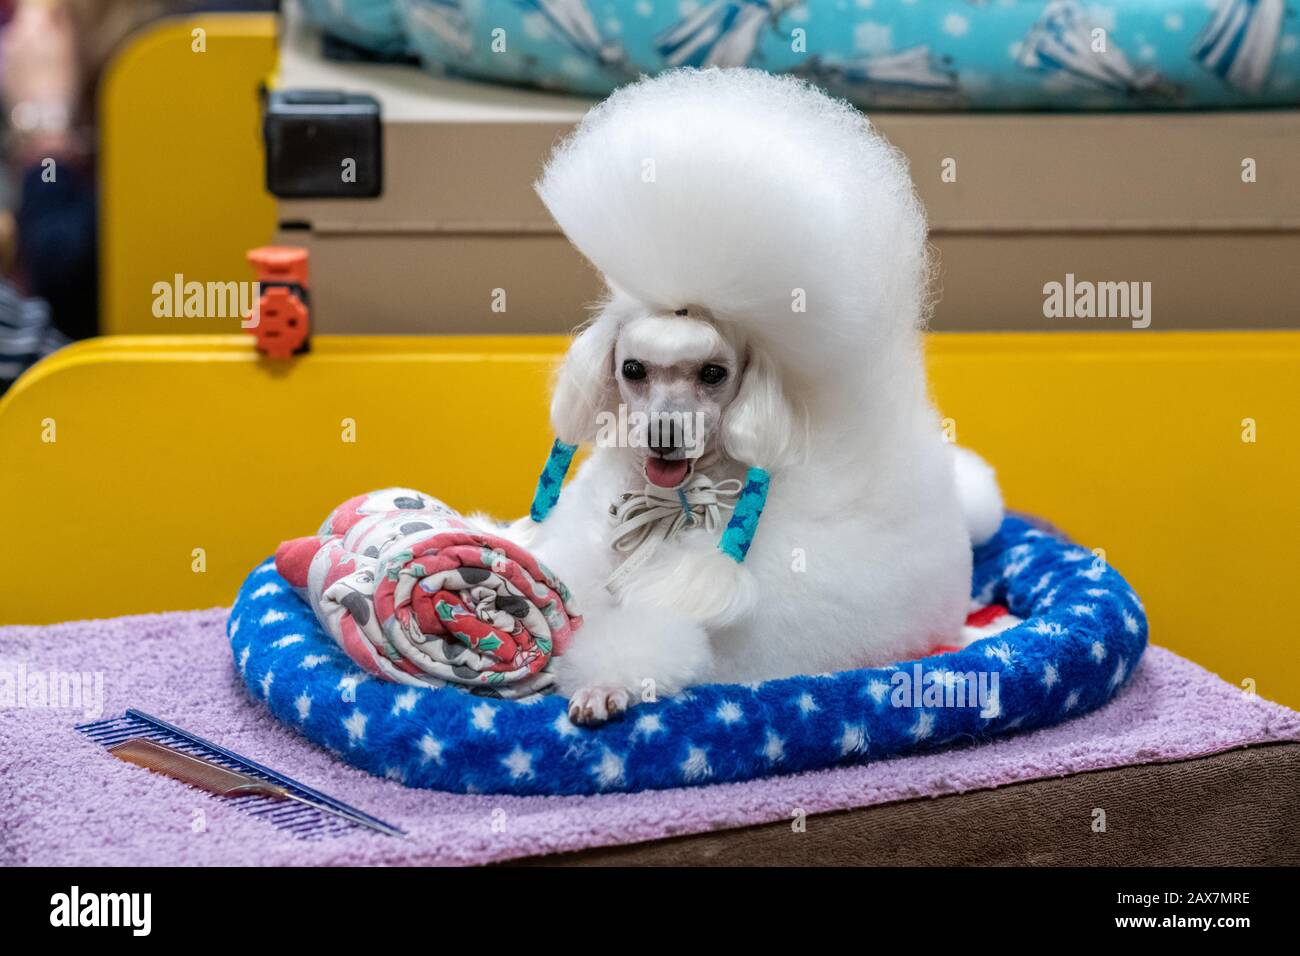 New York, USA. 10th Feb, 2020. Cami the Toy Poodle awaits before competing in the Toy group category at the 144th Westminster Kennel Club Dog show in New York city's Madison Square Garden. Cami, a 4-year-old veteran competitor whose formal competition name is Smash Jp Copenhagen, took 3rd place.  Credit: Enrique Shore/Alamy Live News Stock Photo